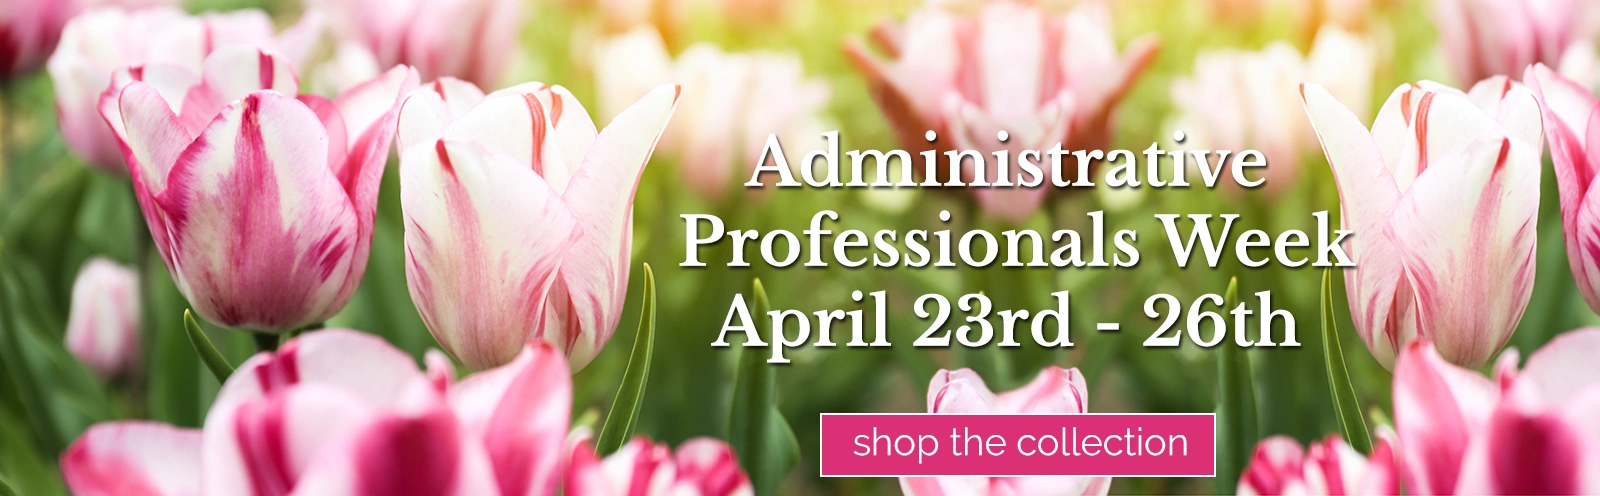 The Administrative Professionals Week Collection from Sharon Elizabeth's Floral Designs in Berlin, CT